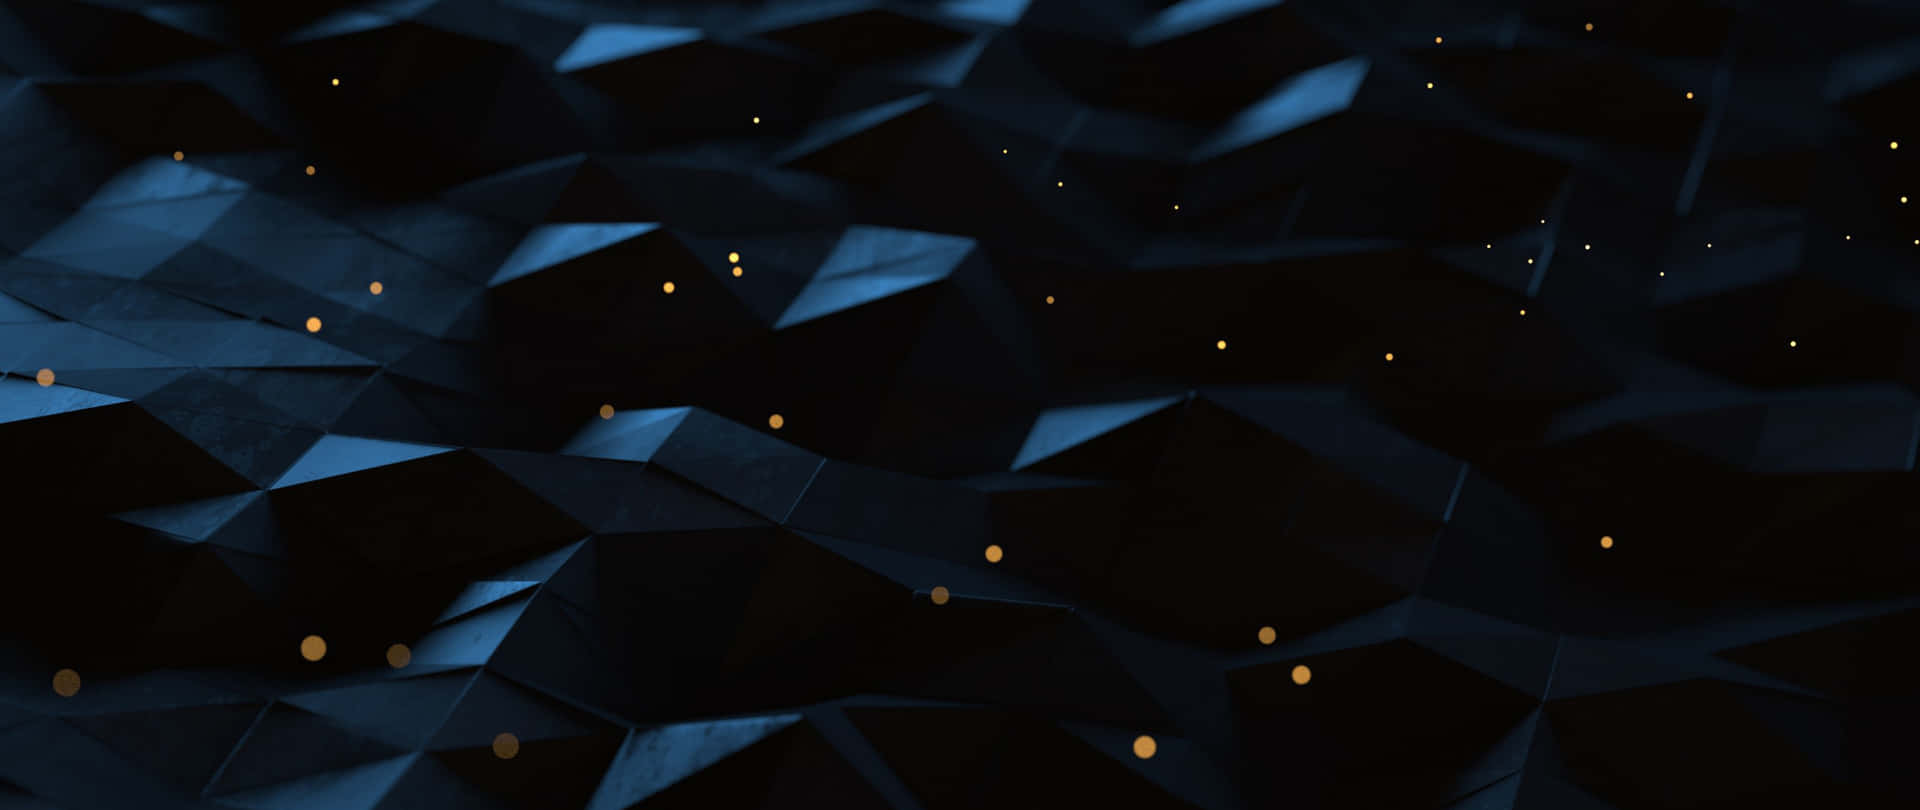 A Black Background With Gold Stars And Triangles Wallpaper